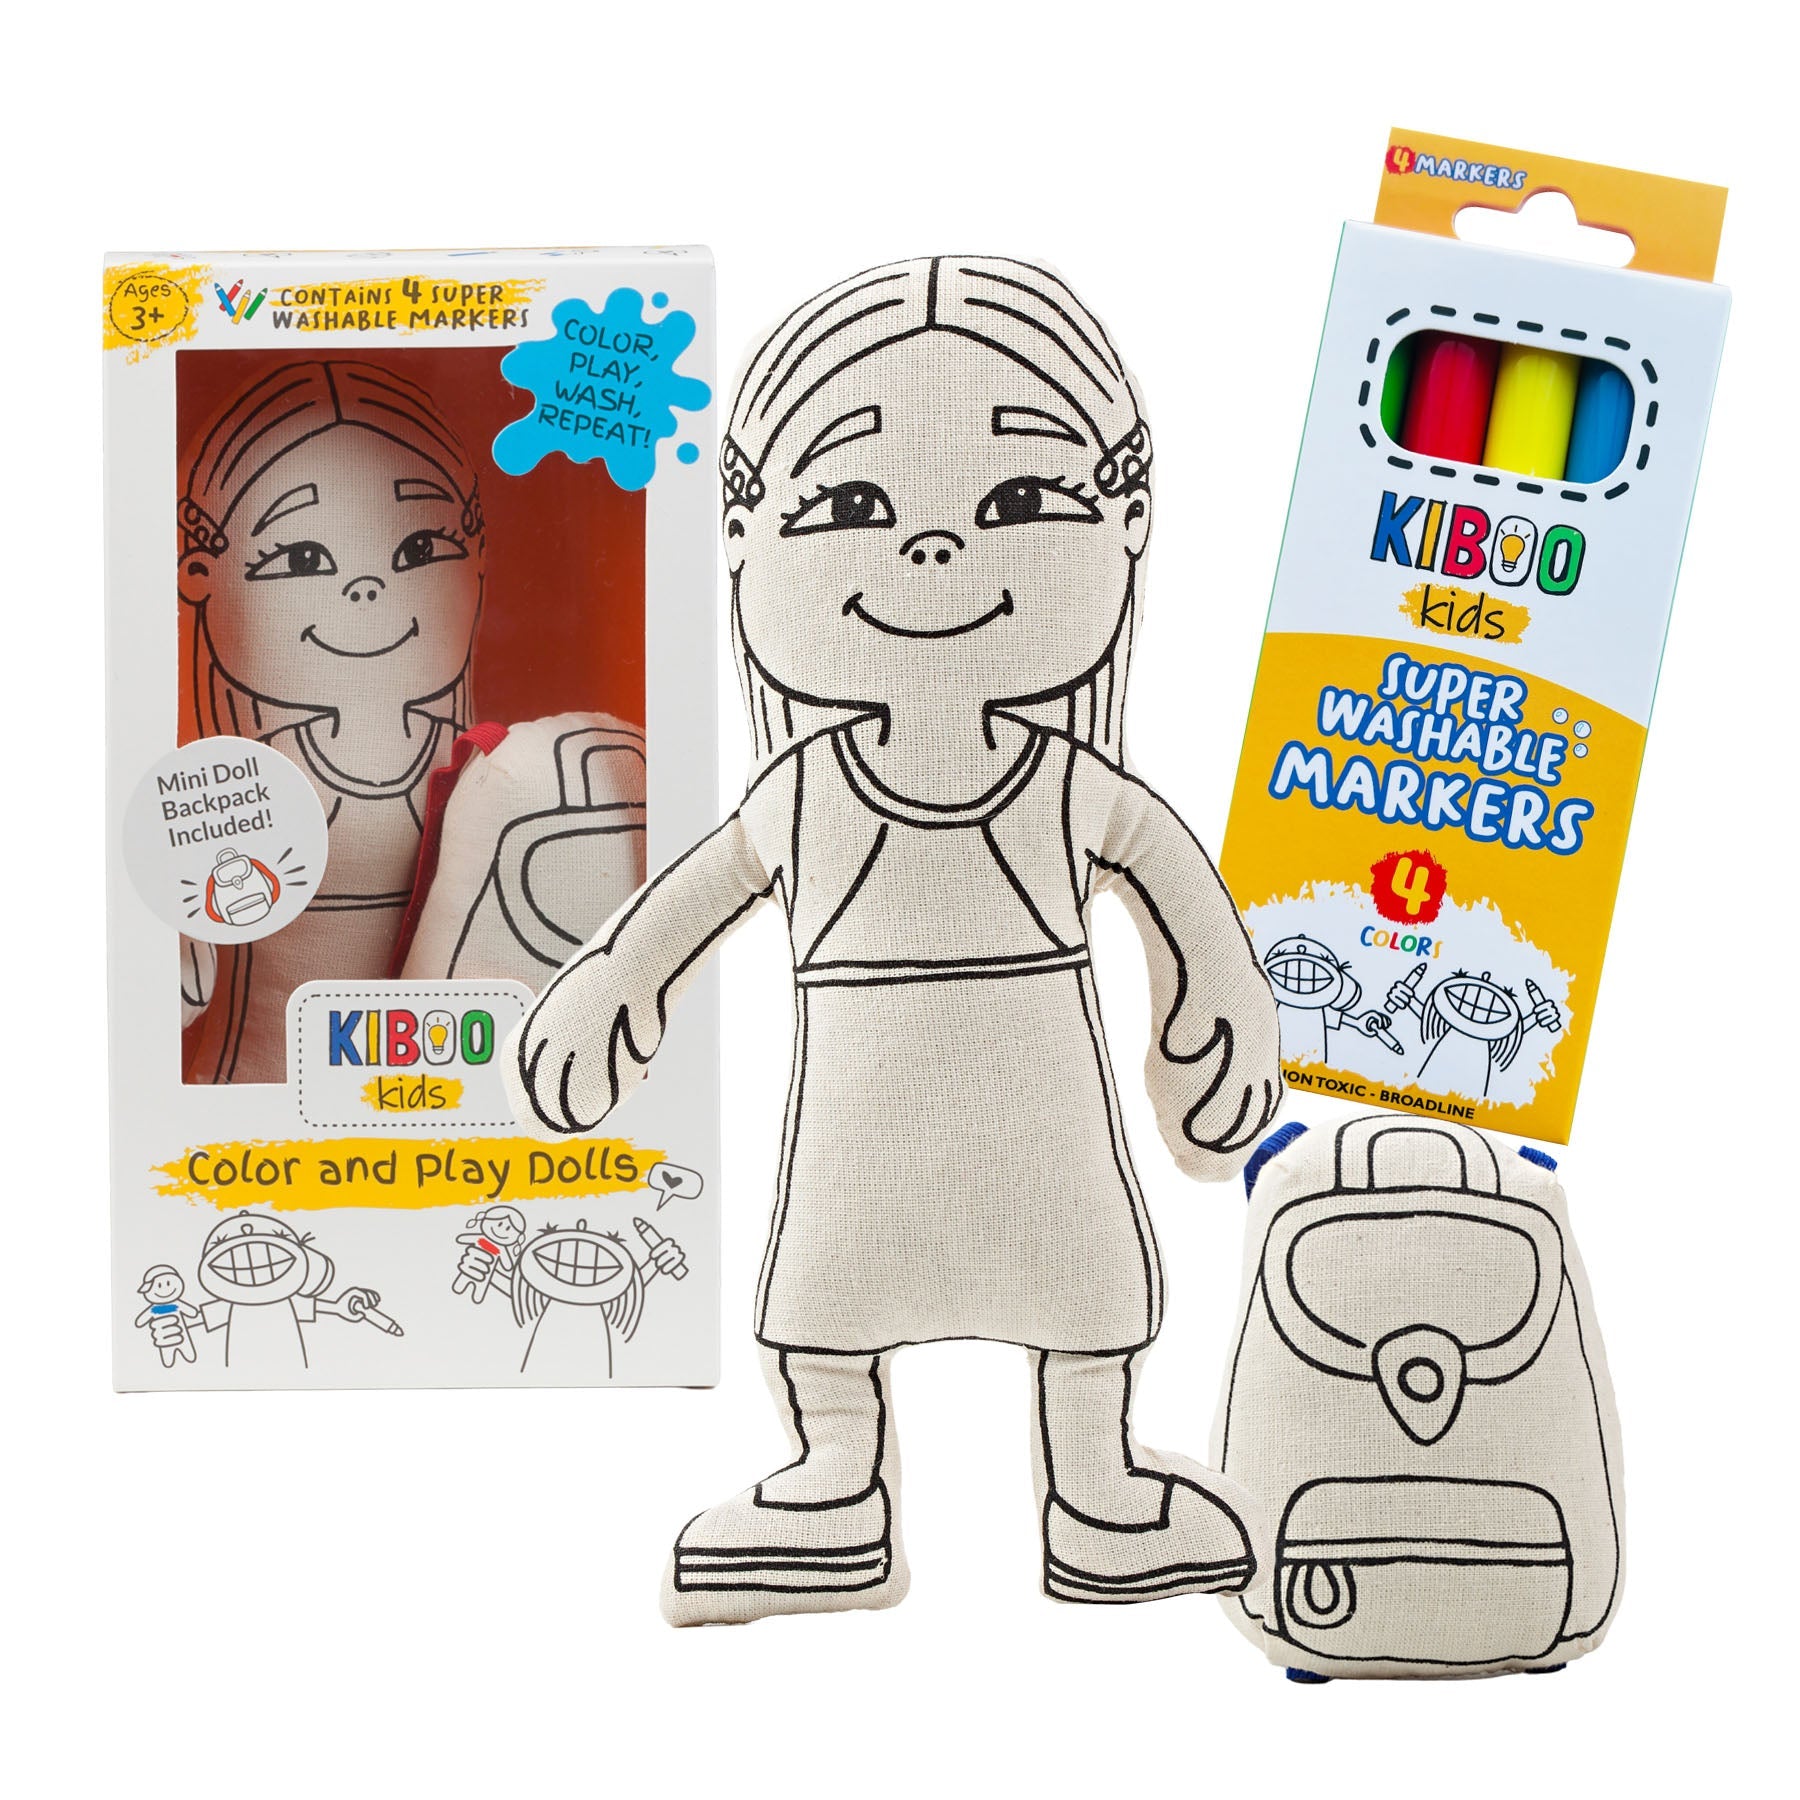 Kiboo Kids: Girl With Long Hair - Colorable And Washable Doll For Creative Play